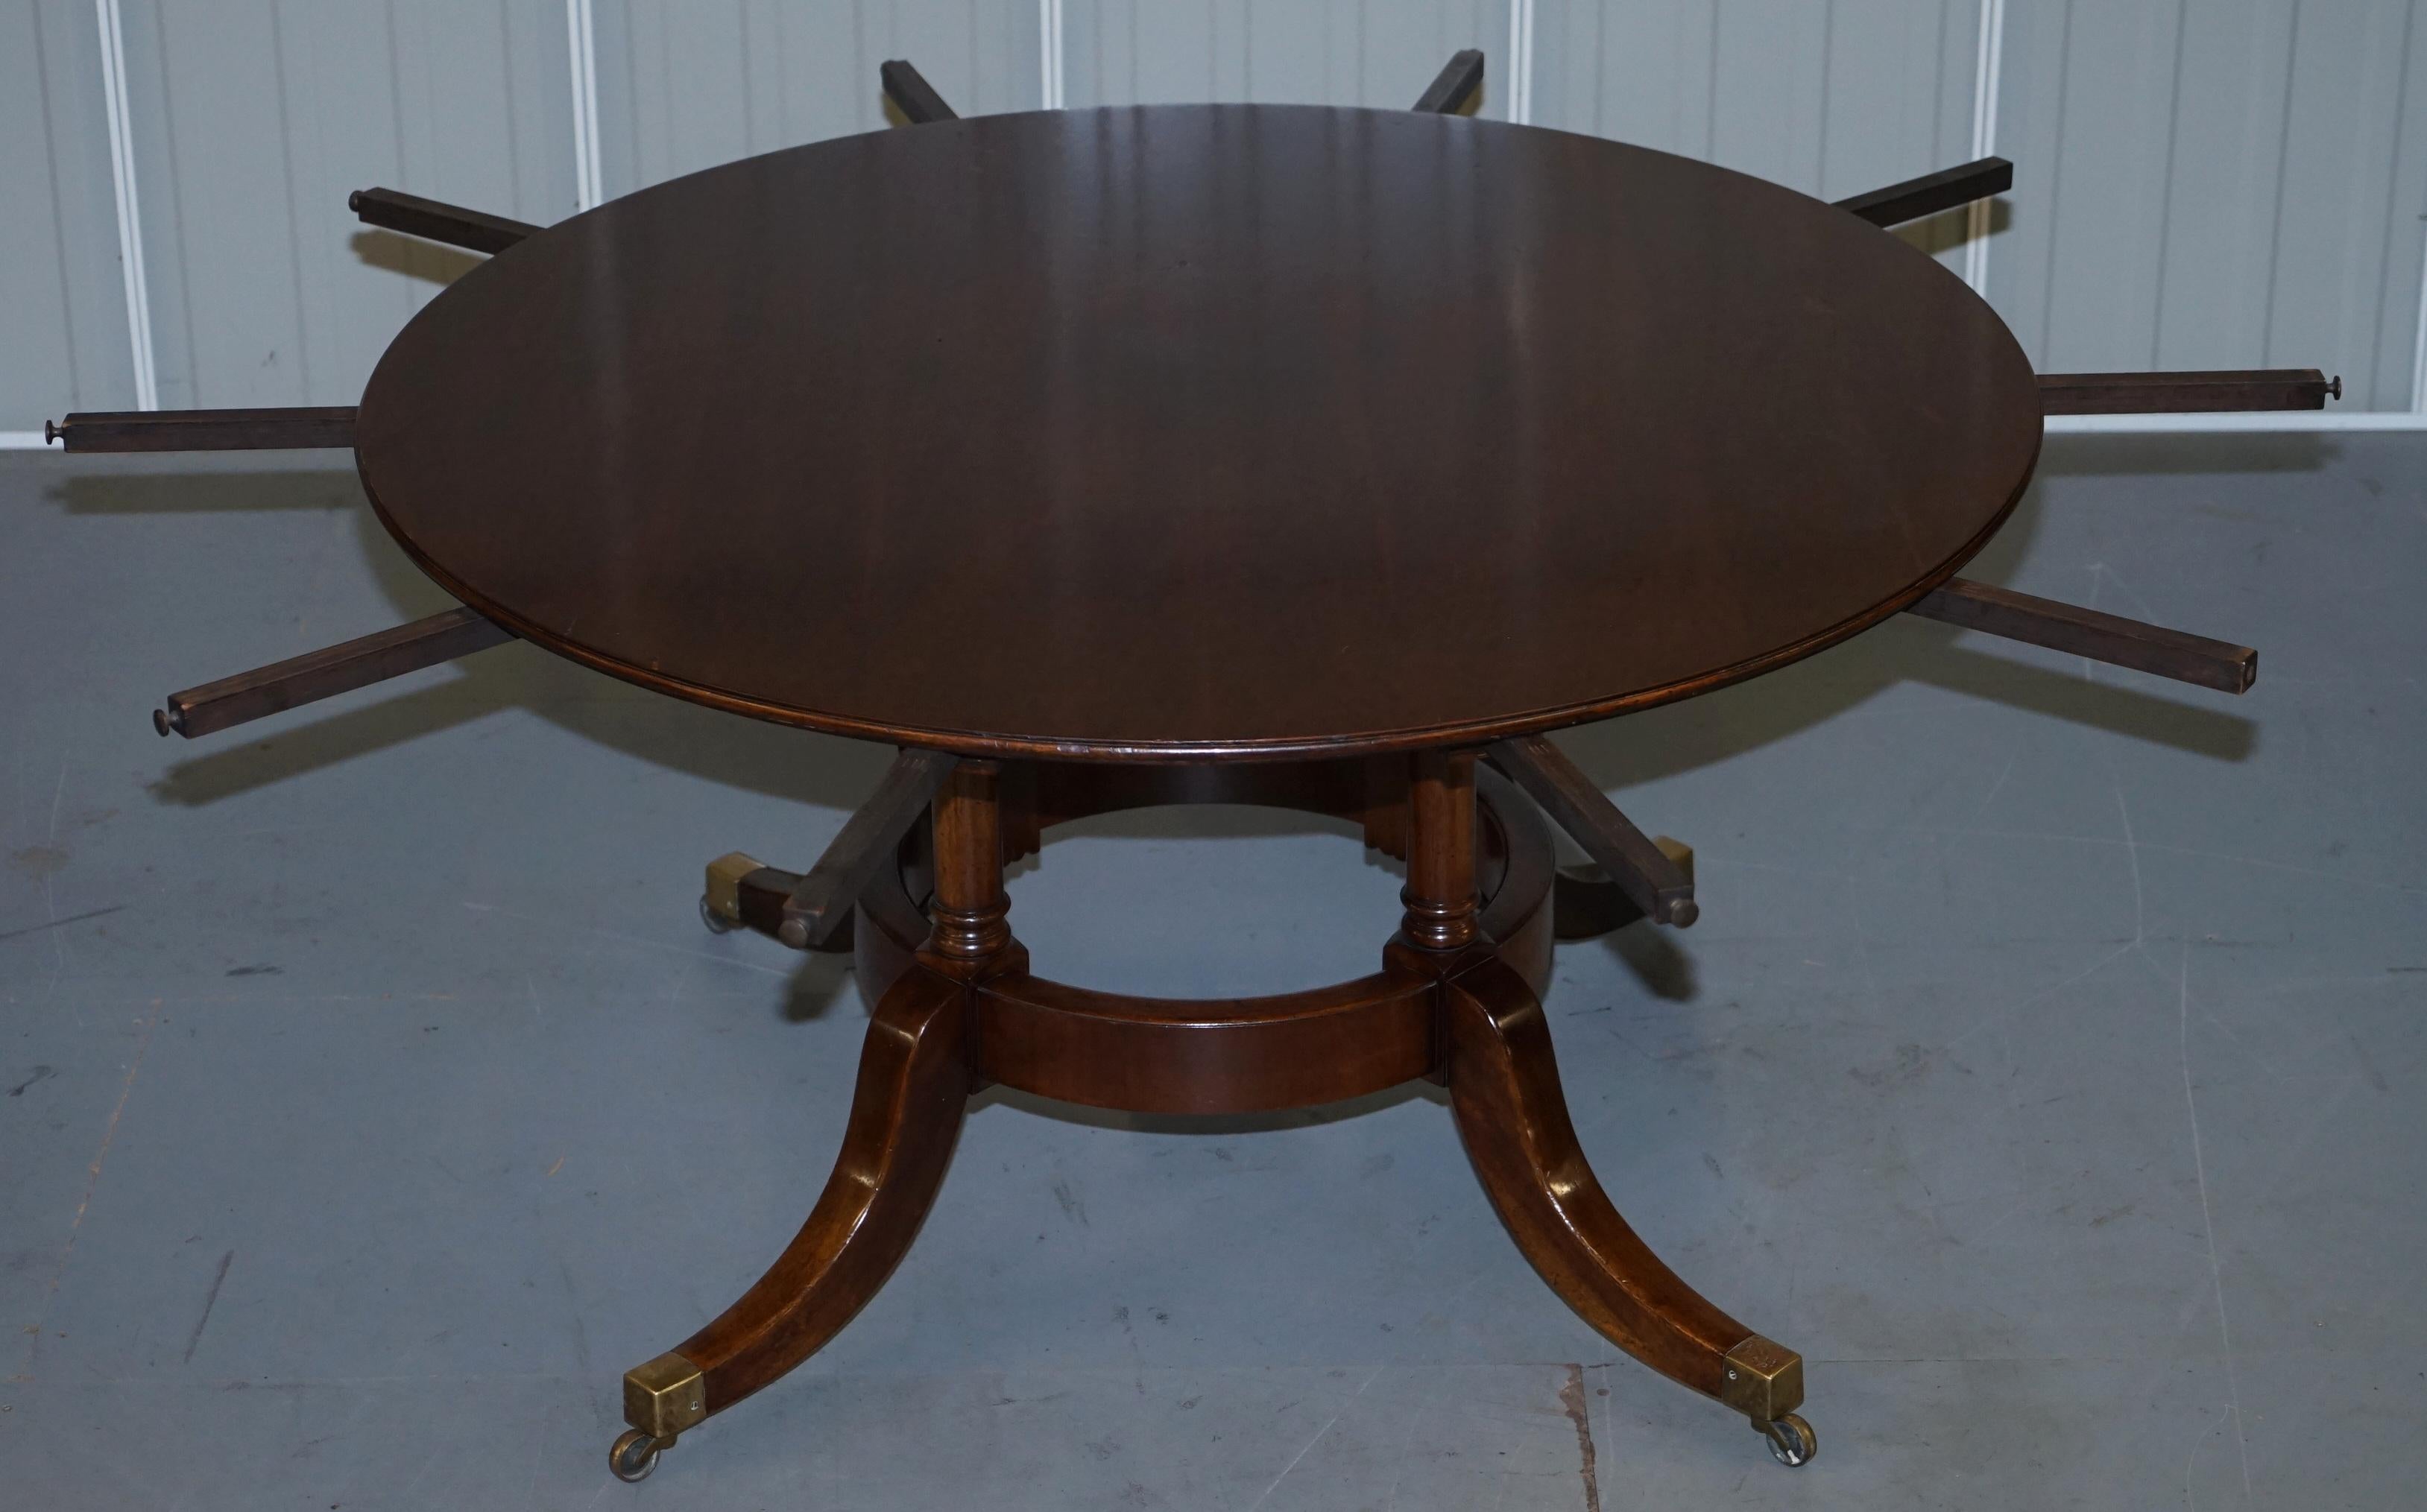 Brass Vintage Solid Hardwood Extending Round Jupe Dining Table with Cabinet & Fittings